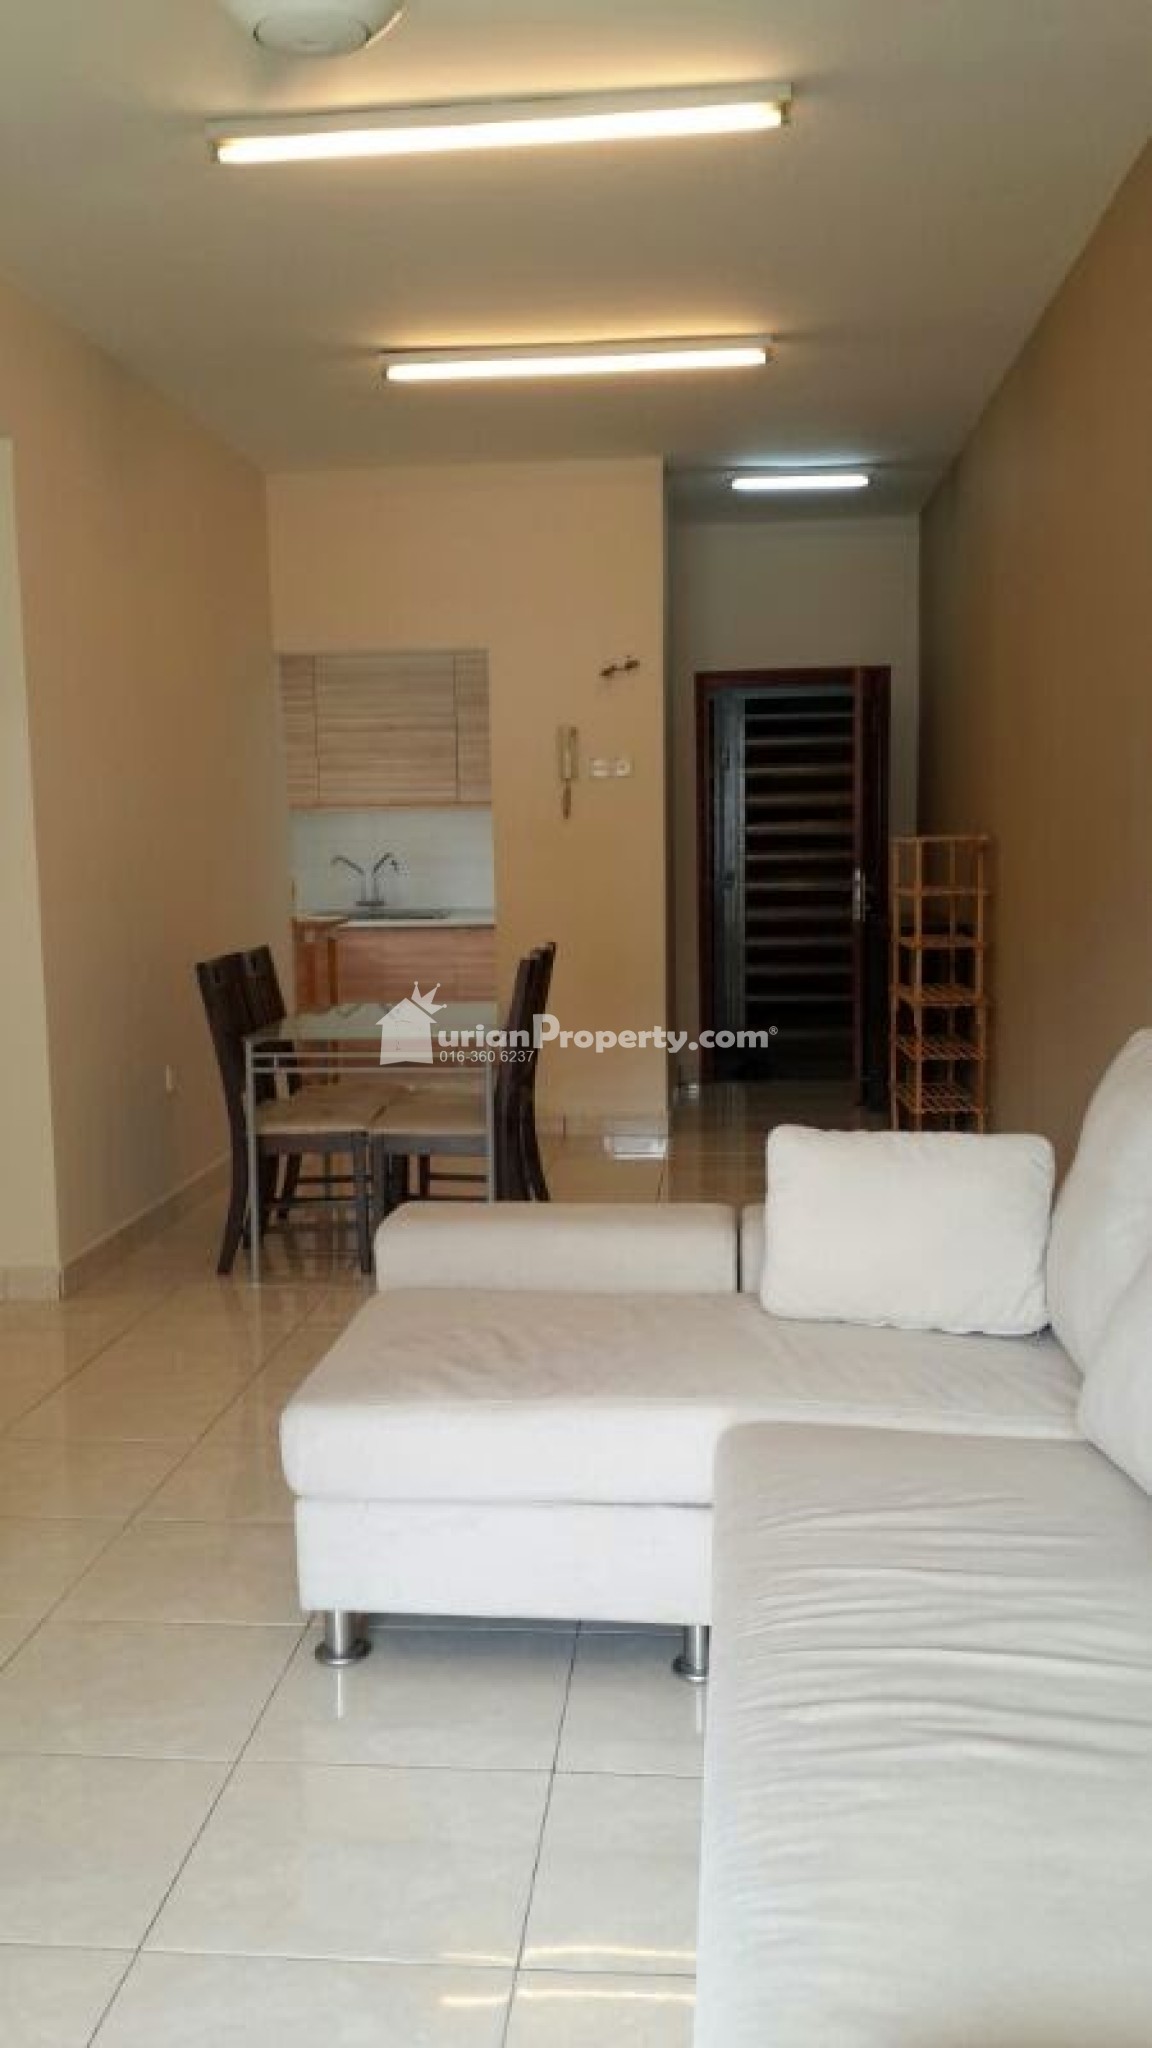 Condo For Rent at Perdana View